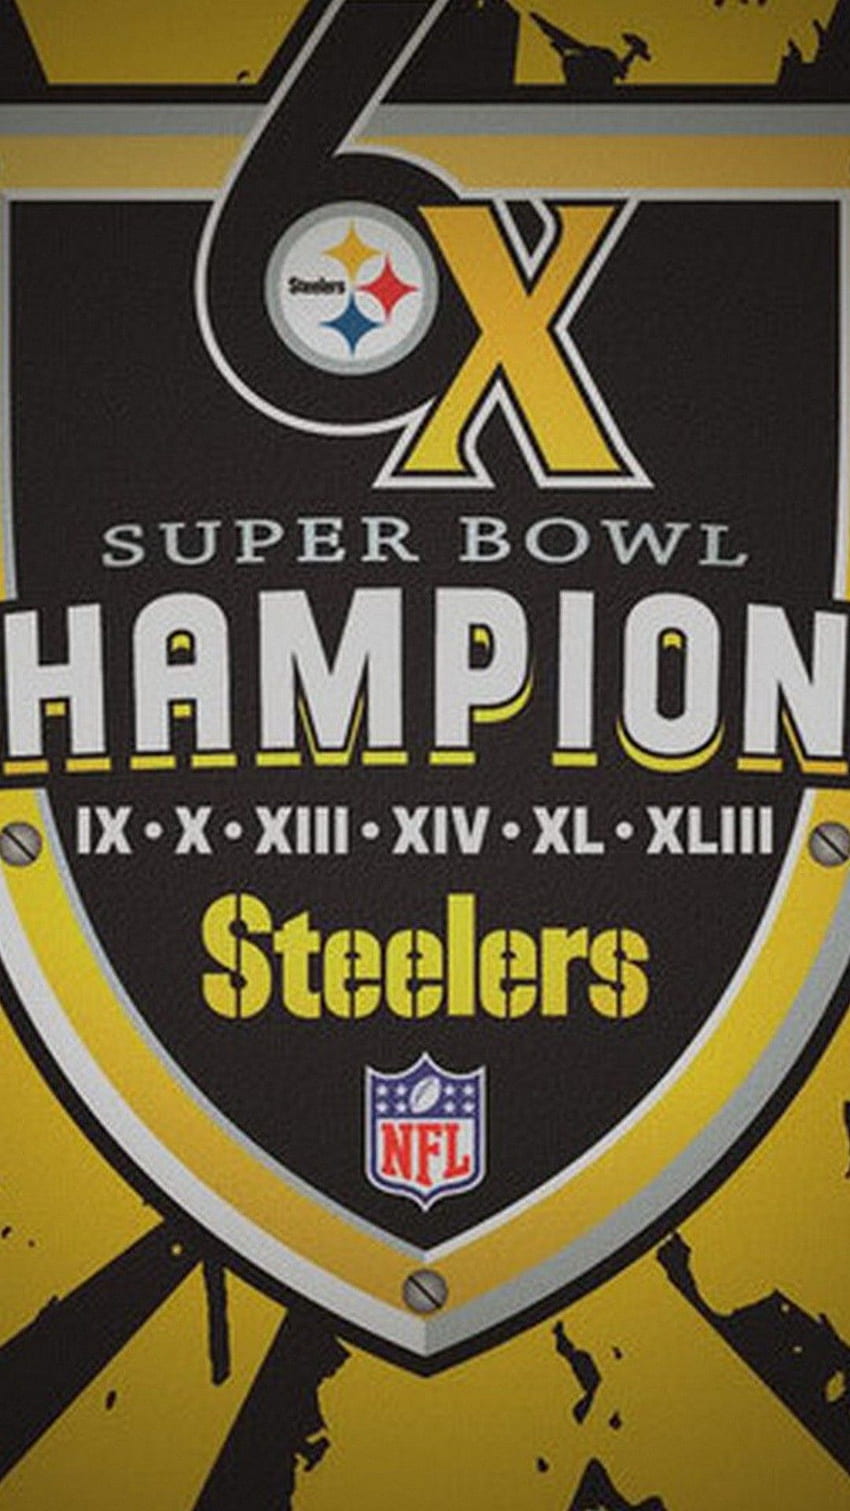 Steelers Cool iPhone Wallpapers on WallpaperDog